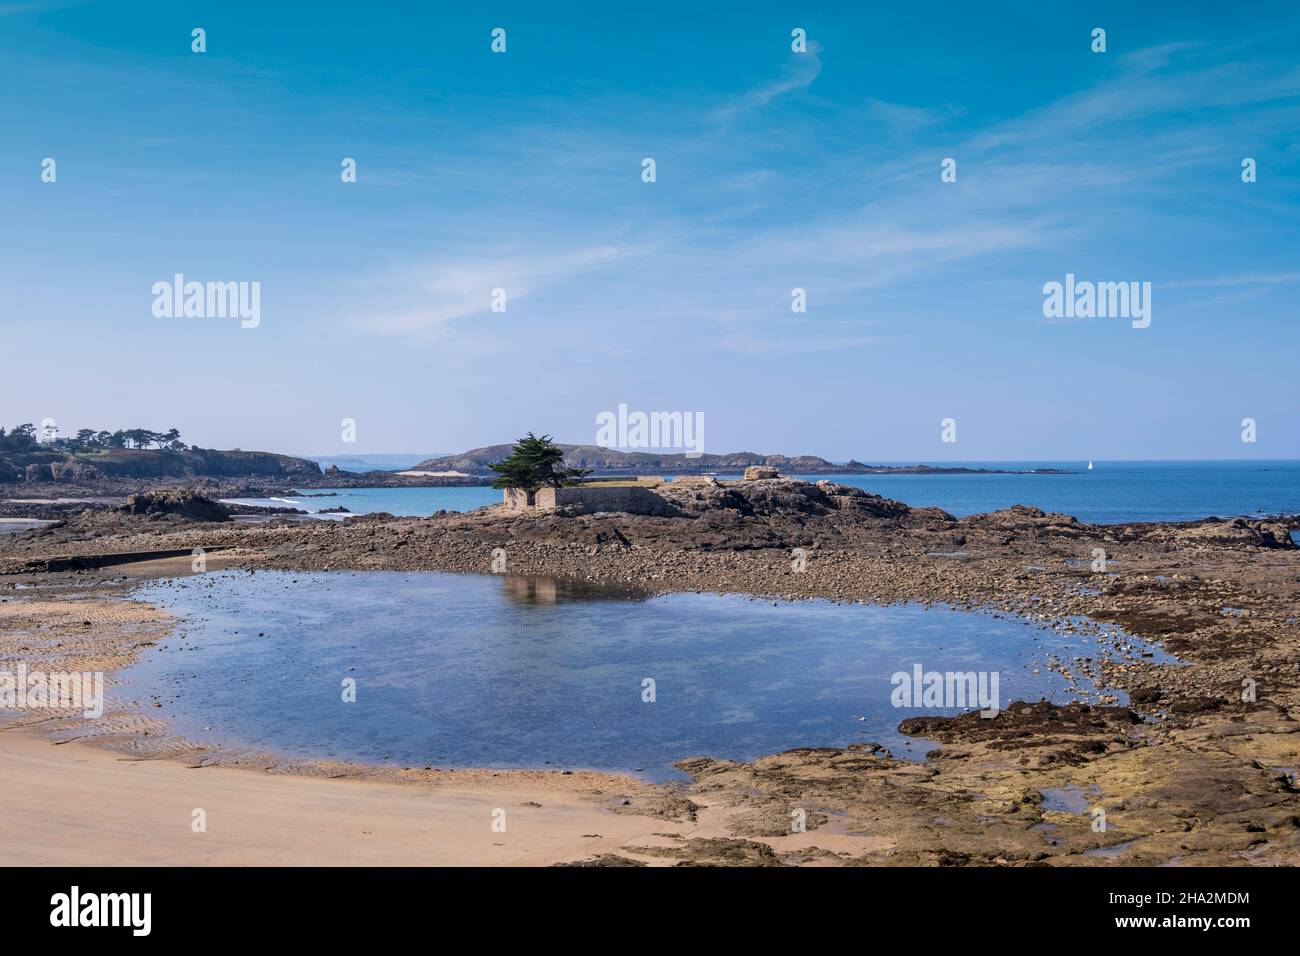 Saint-Briac-sur-Mer (Brittany, north-western France): Beach of Port Hue and the islet “ilot de la Dame Jouanne” Stock Photo